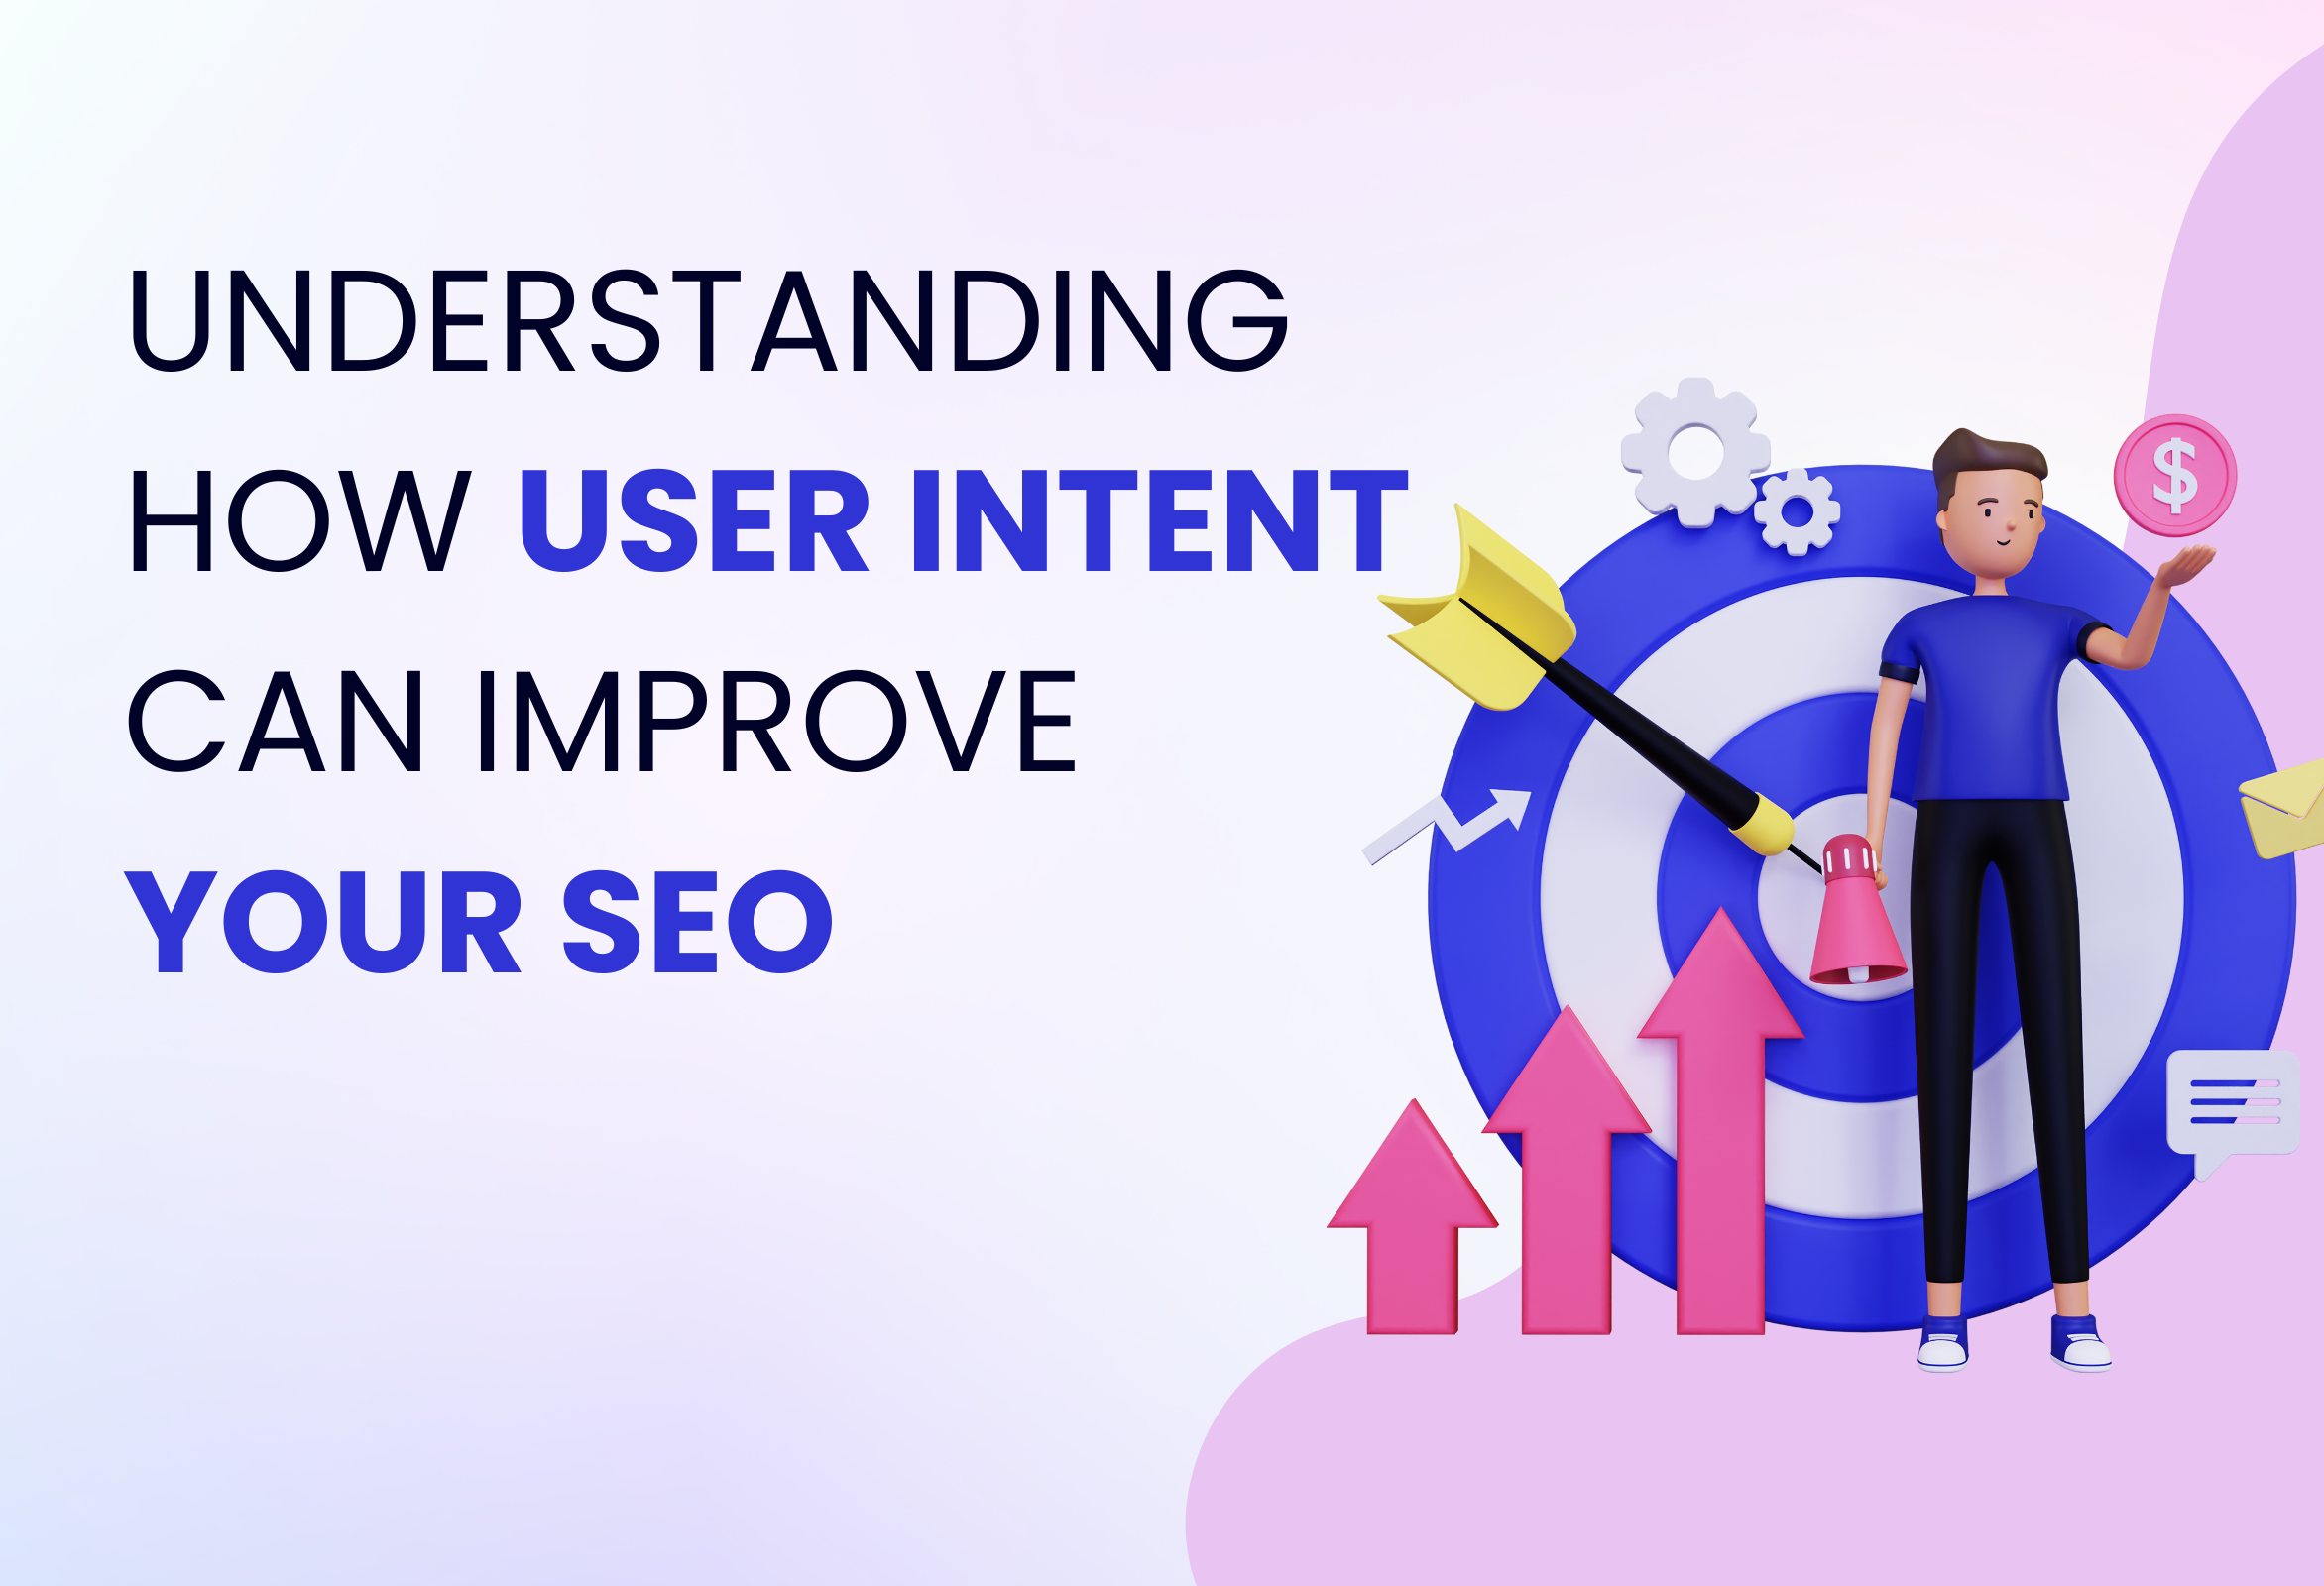 User Intent To Improve Your SEO